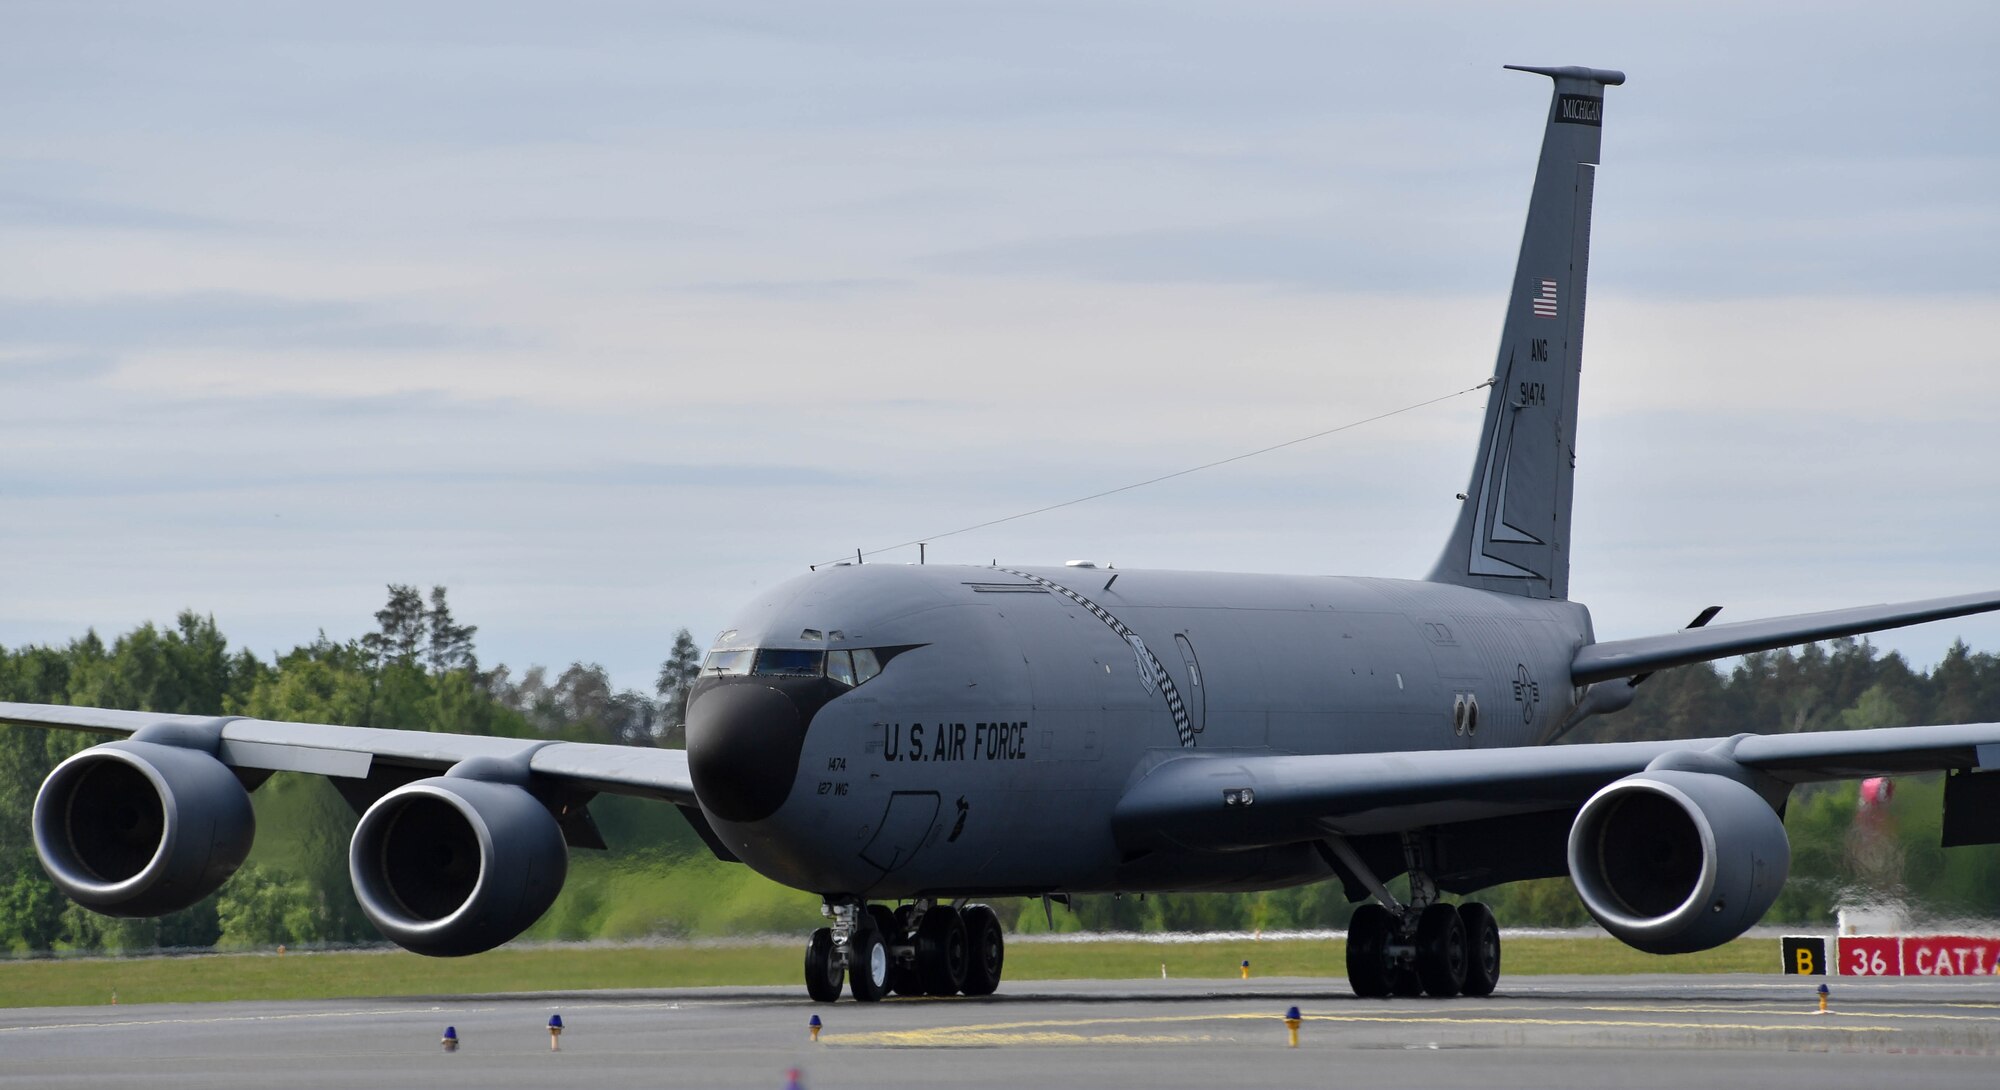 A U.S. Air National Guard KC-135 Stratotanker taxis on a runway after landing on Riga International Airport, Latvia, for exercise Saber Strike 2017, June 4, 2017. Two KC-135s flying out of Selfridge Air National Guard Base, Mich., landed at the airport carrying approximately 50 Airmen to participate in Saber Strike 2017. (U.S Air Force photo by Senior Airman Tryphena Mayhugh)